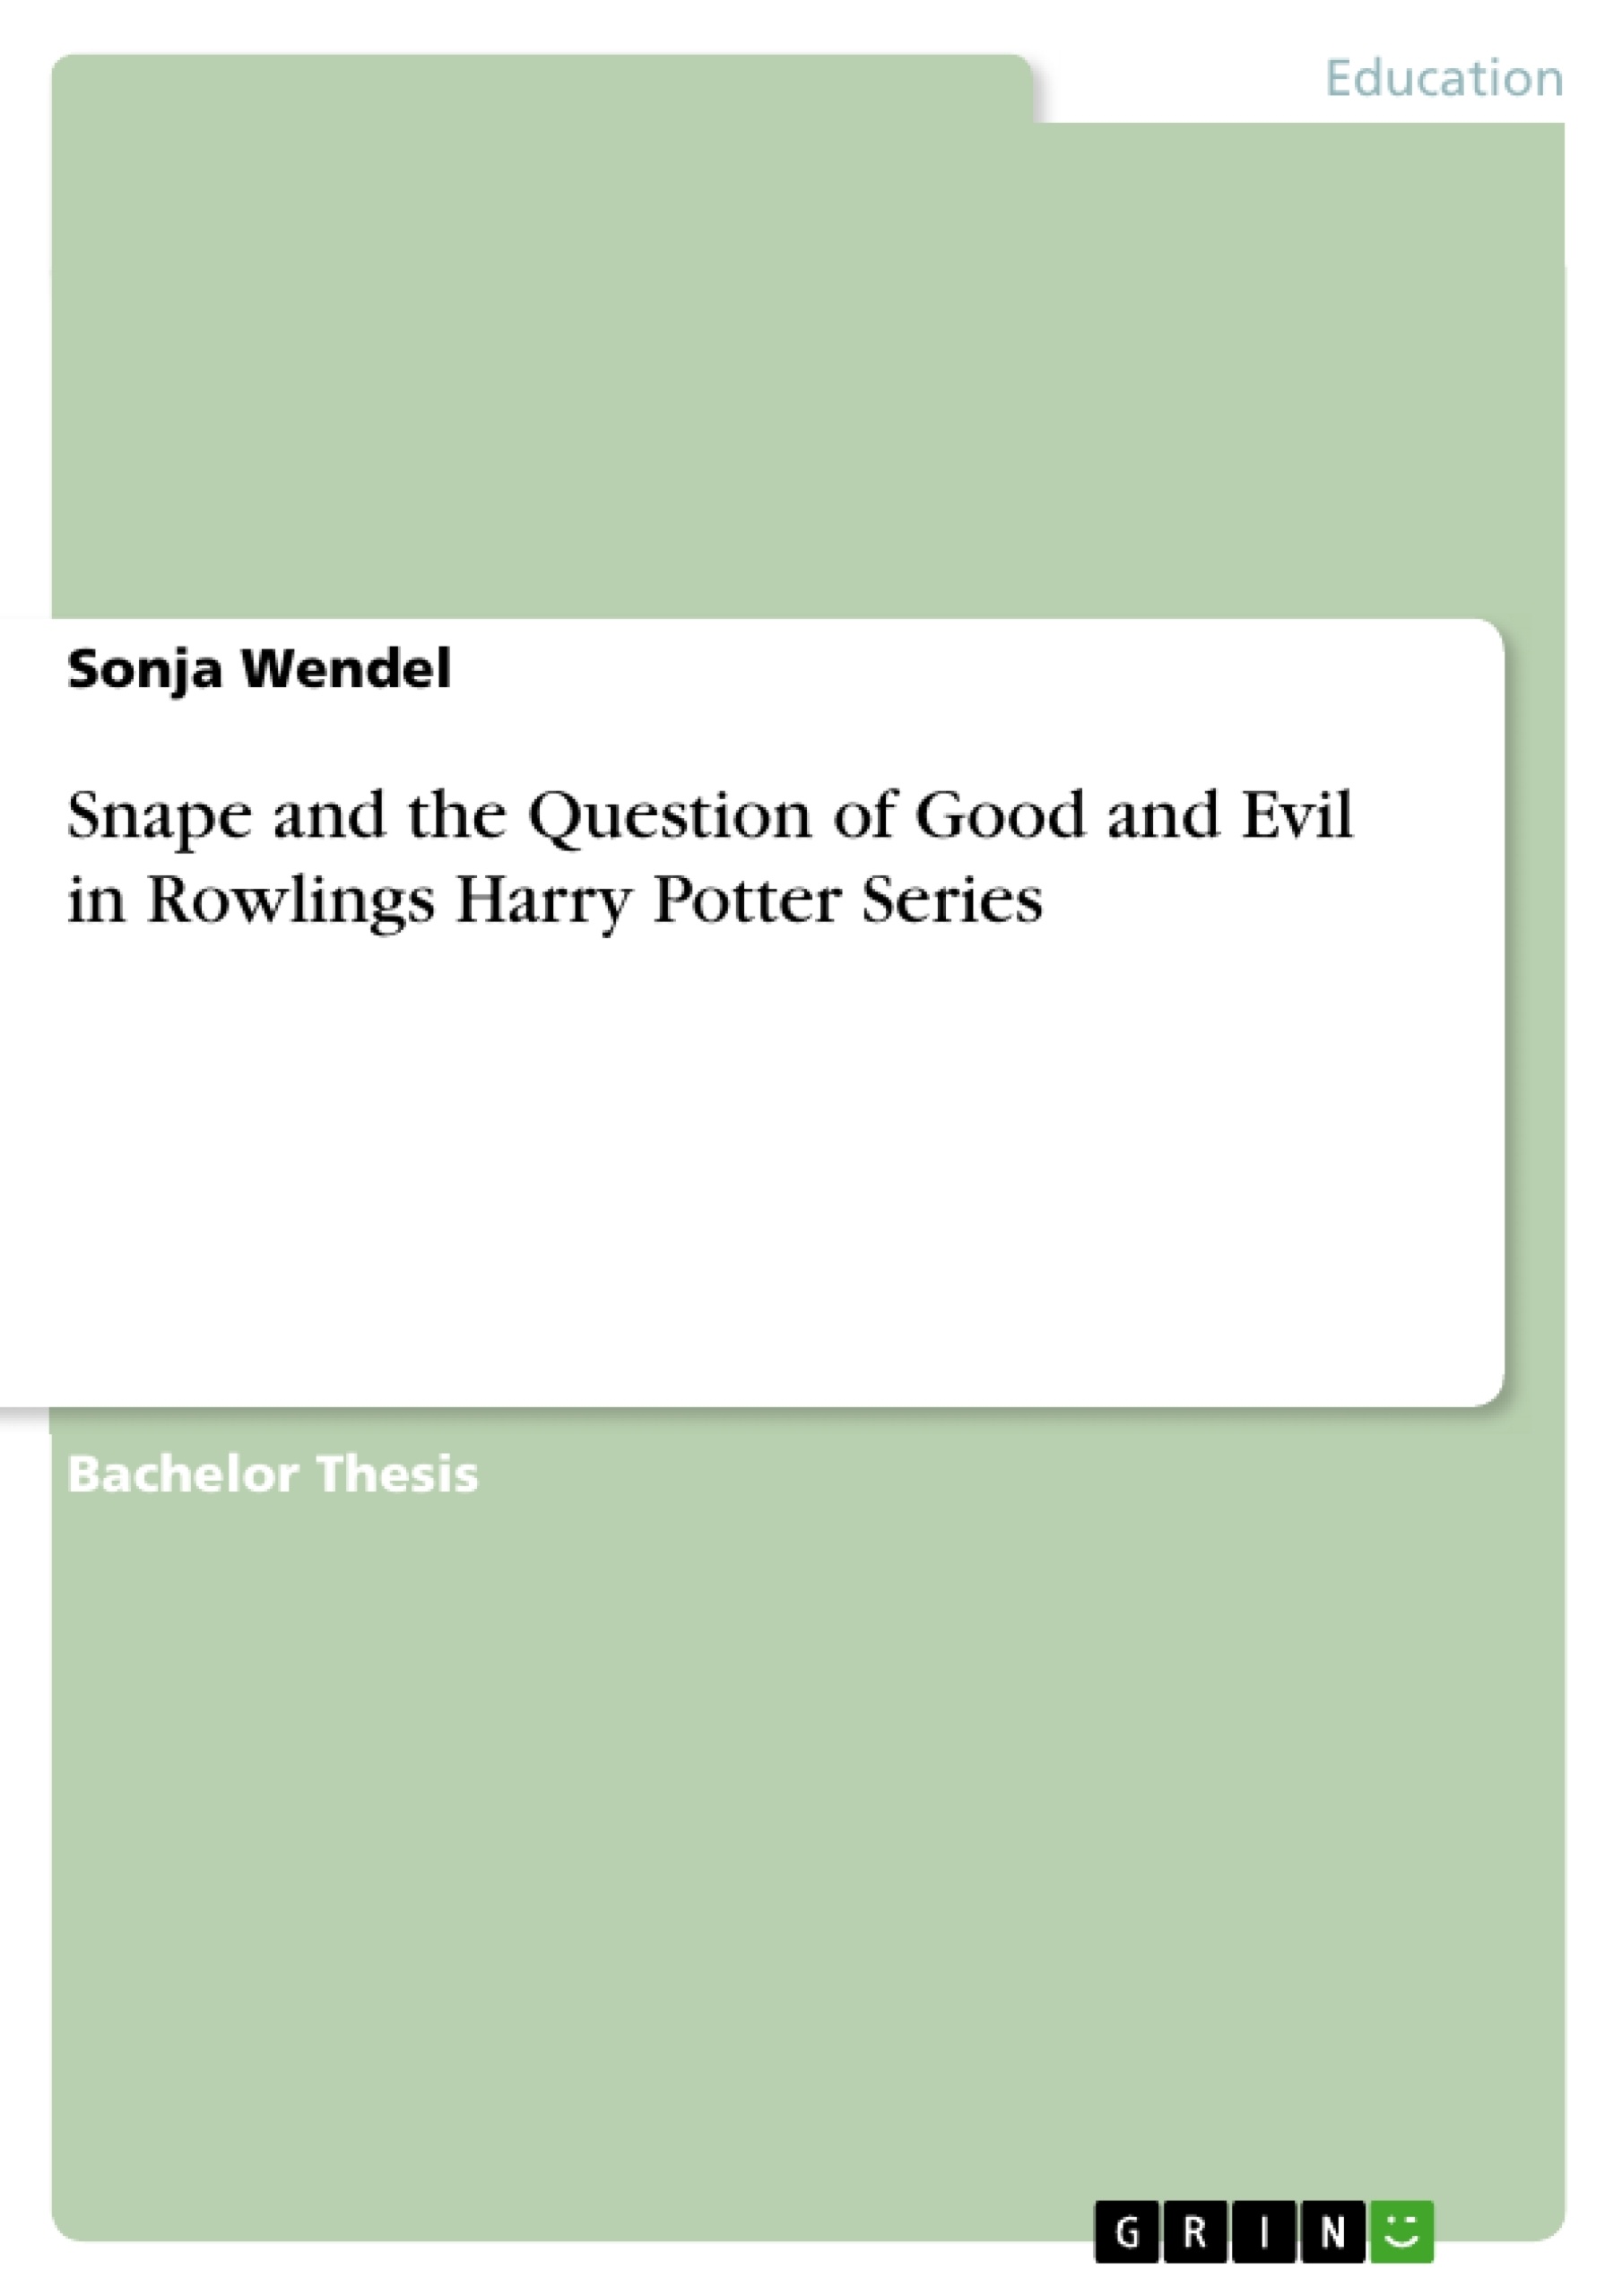 Title: Snape and the Question of Good and Evil in Rowlings Harry Potter Series